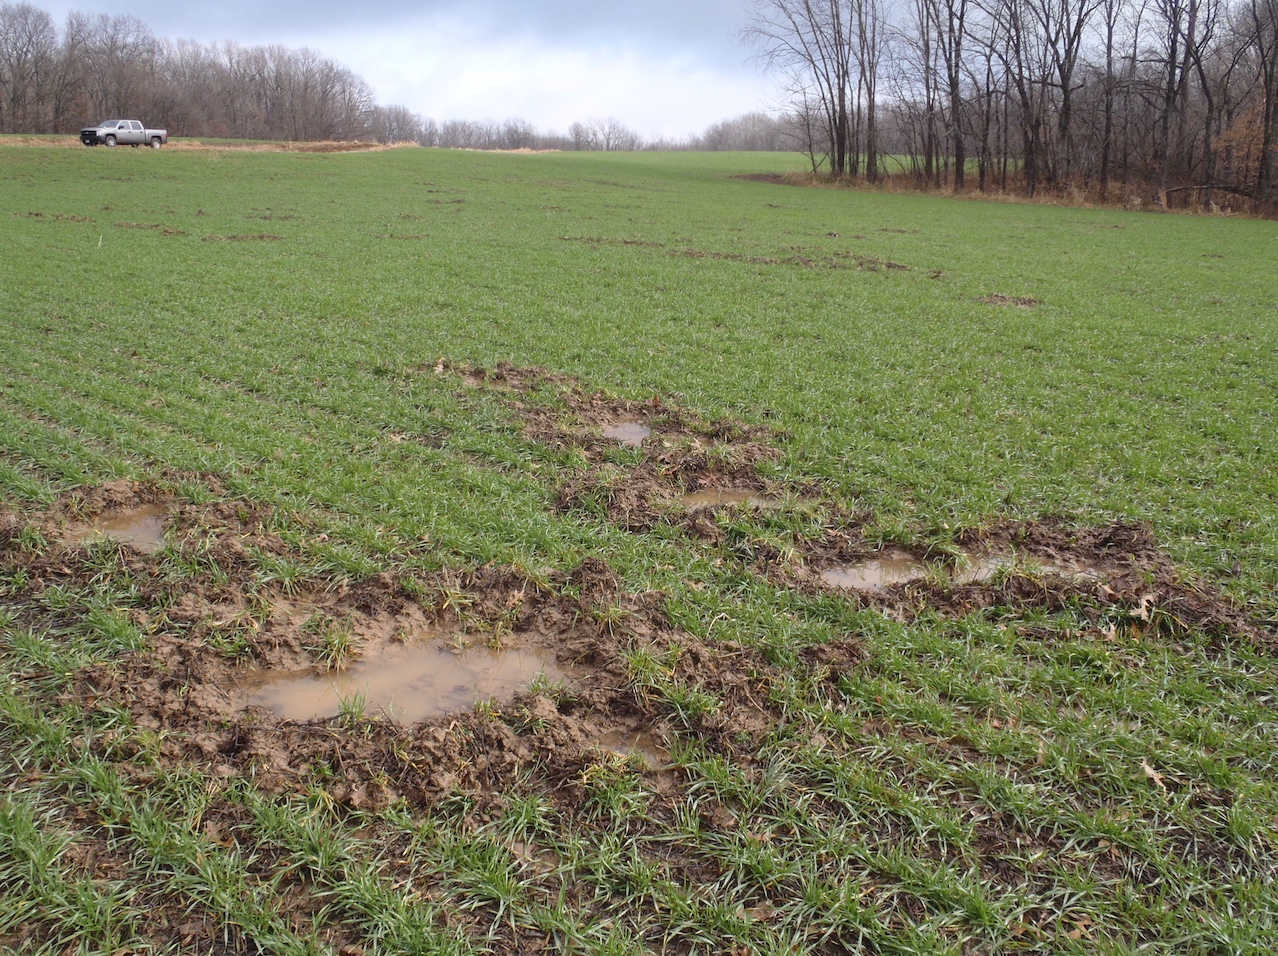 Rooting in wheat field caused by feral swine.